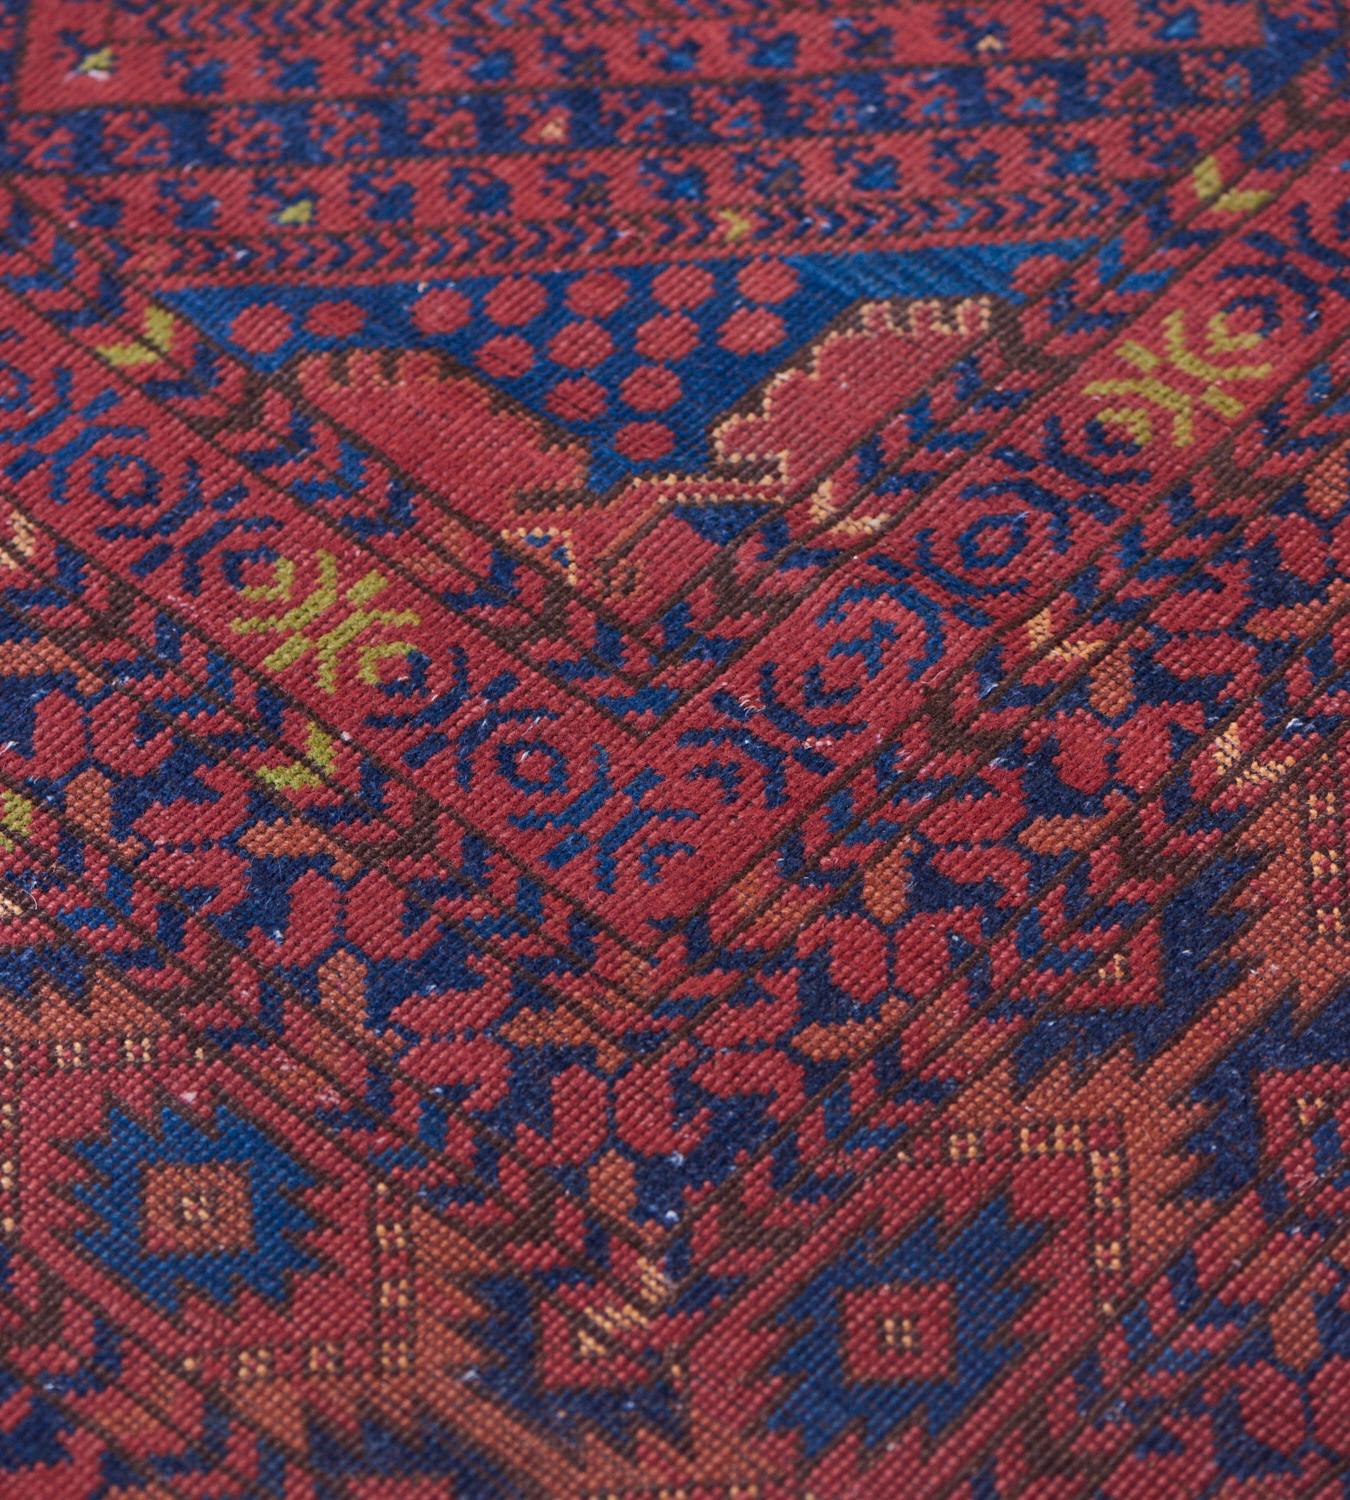 Late 19th Century Handwoven Antique Bokhara Rug In Good Condition For Sale In West Hollywood, CA